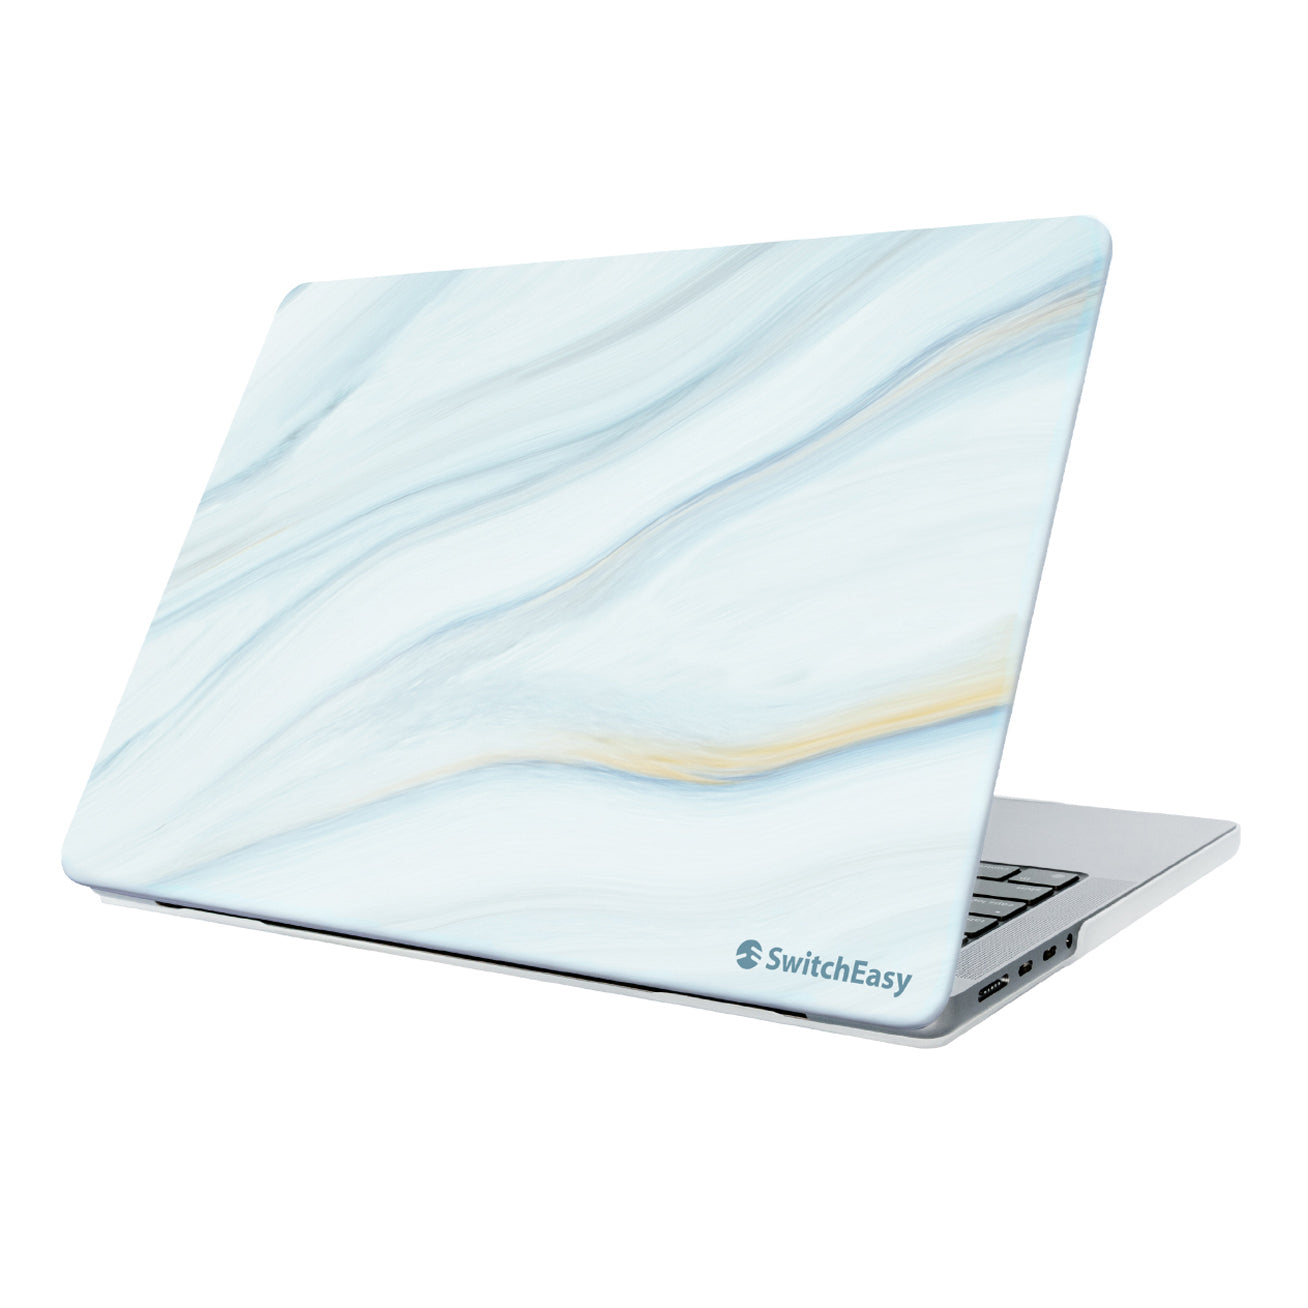 SwitchEasy Marble MacBook Protective Case for MacBook Pro 14"(2021) Default SwitchEasy Cloudy White 